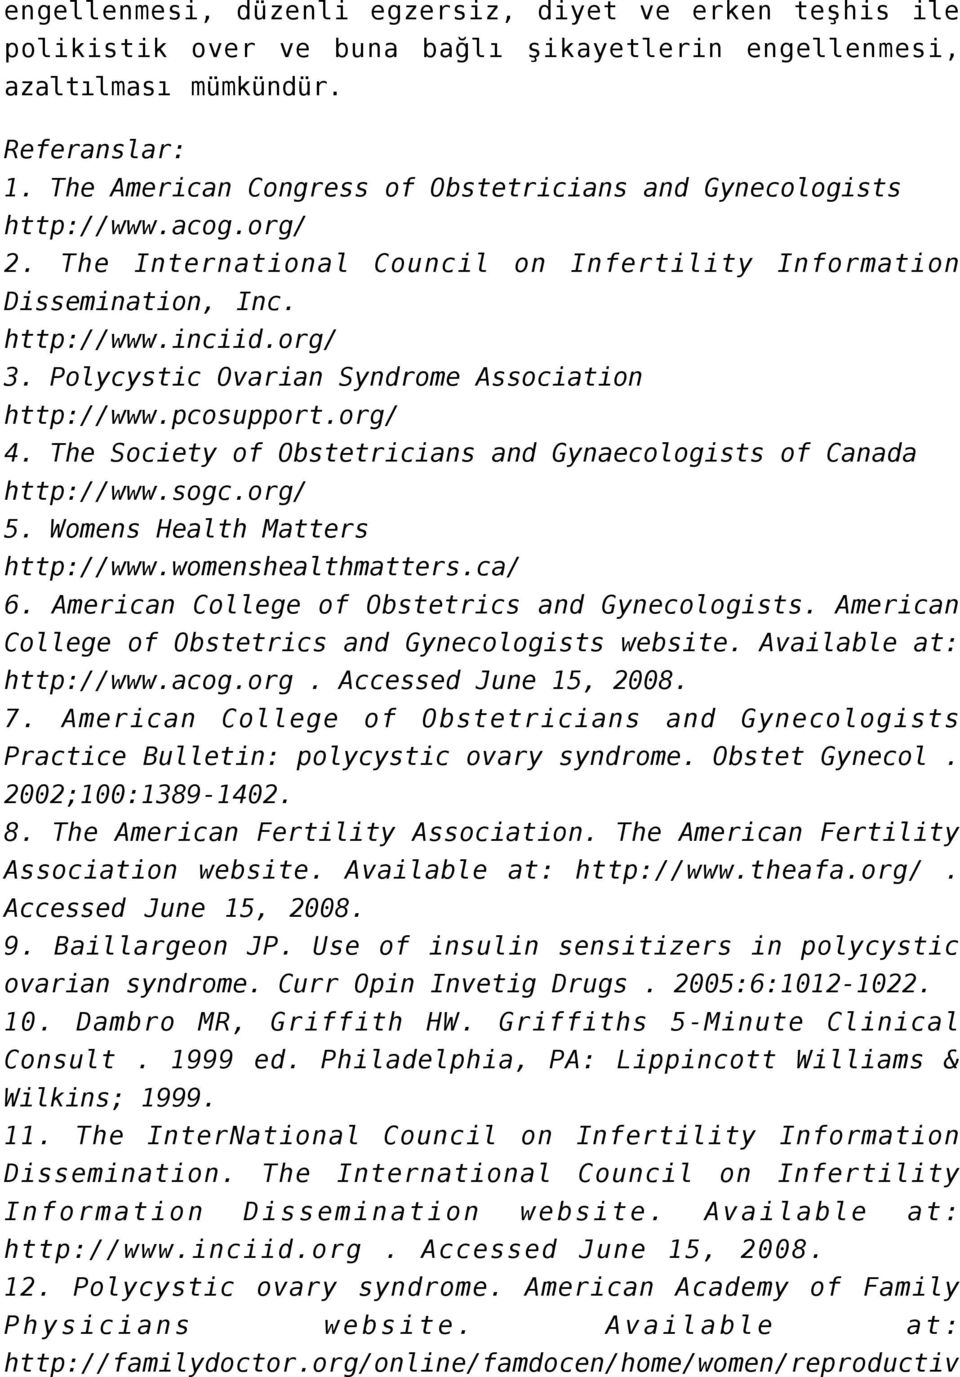 Polycystic Ovarian Syndrome Association http://www.pcosupport.org/ 4. The Society of Obstetricians and Gynaecologists of Canada http://www.sogc.org/ 5. Womens Health Matters http://www.